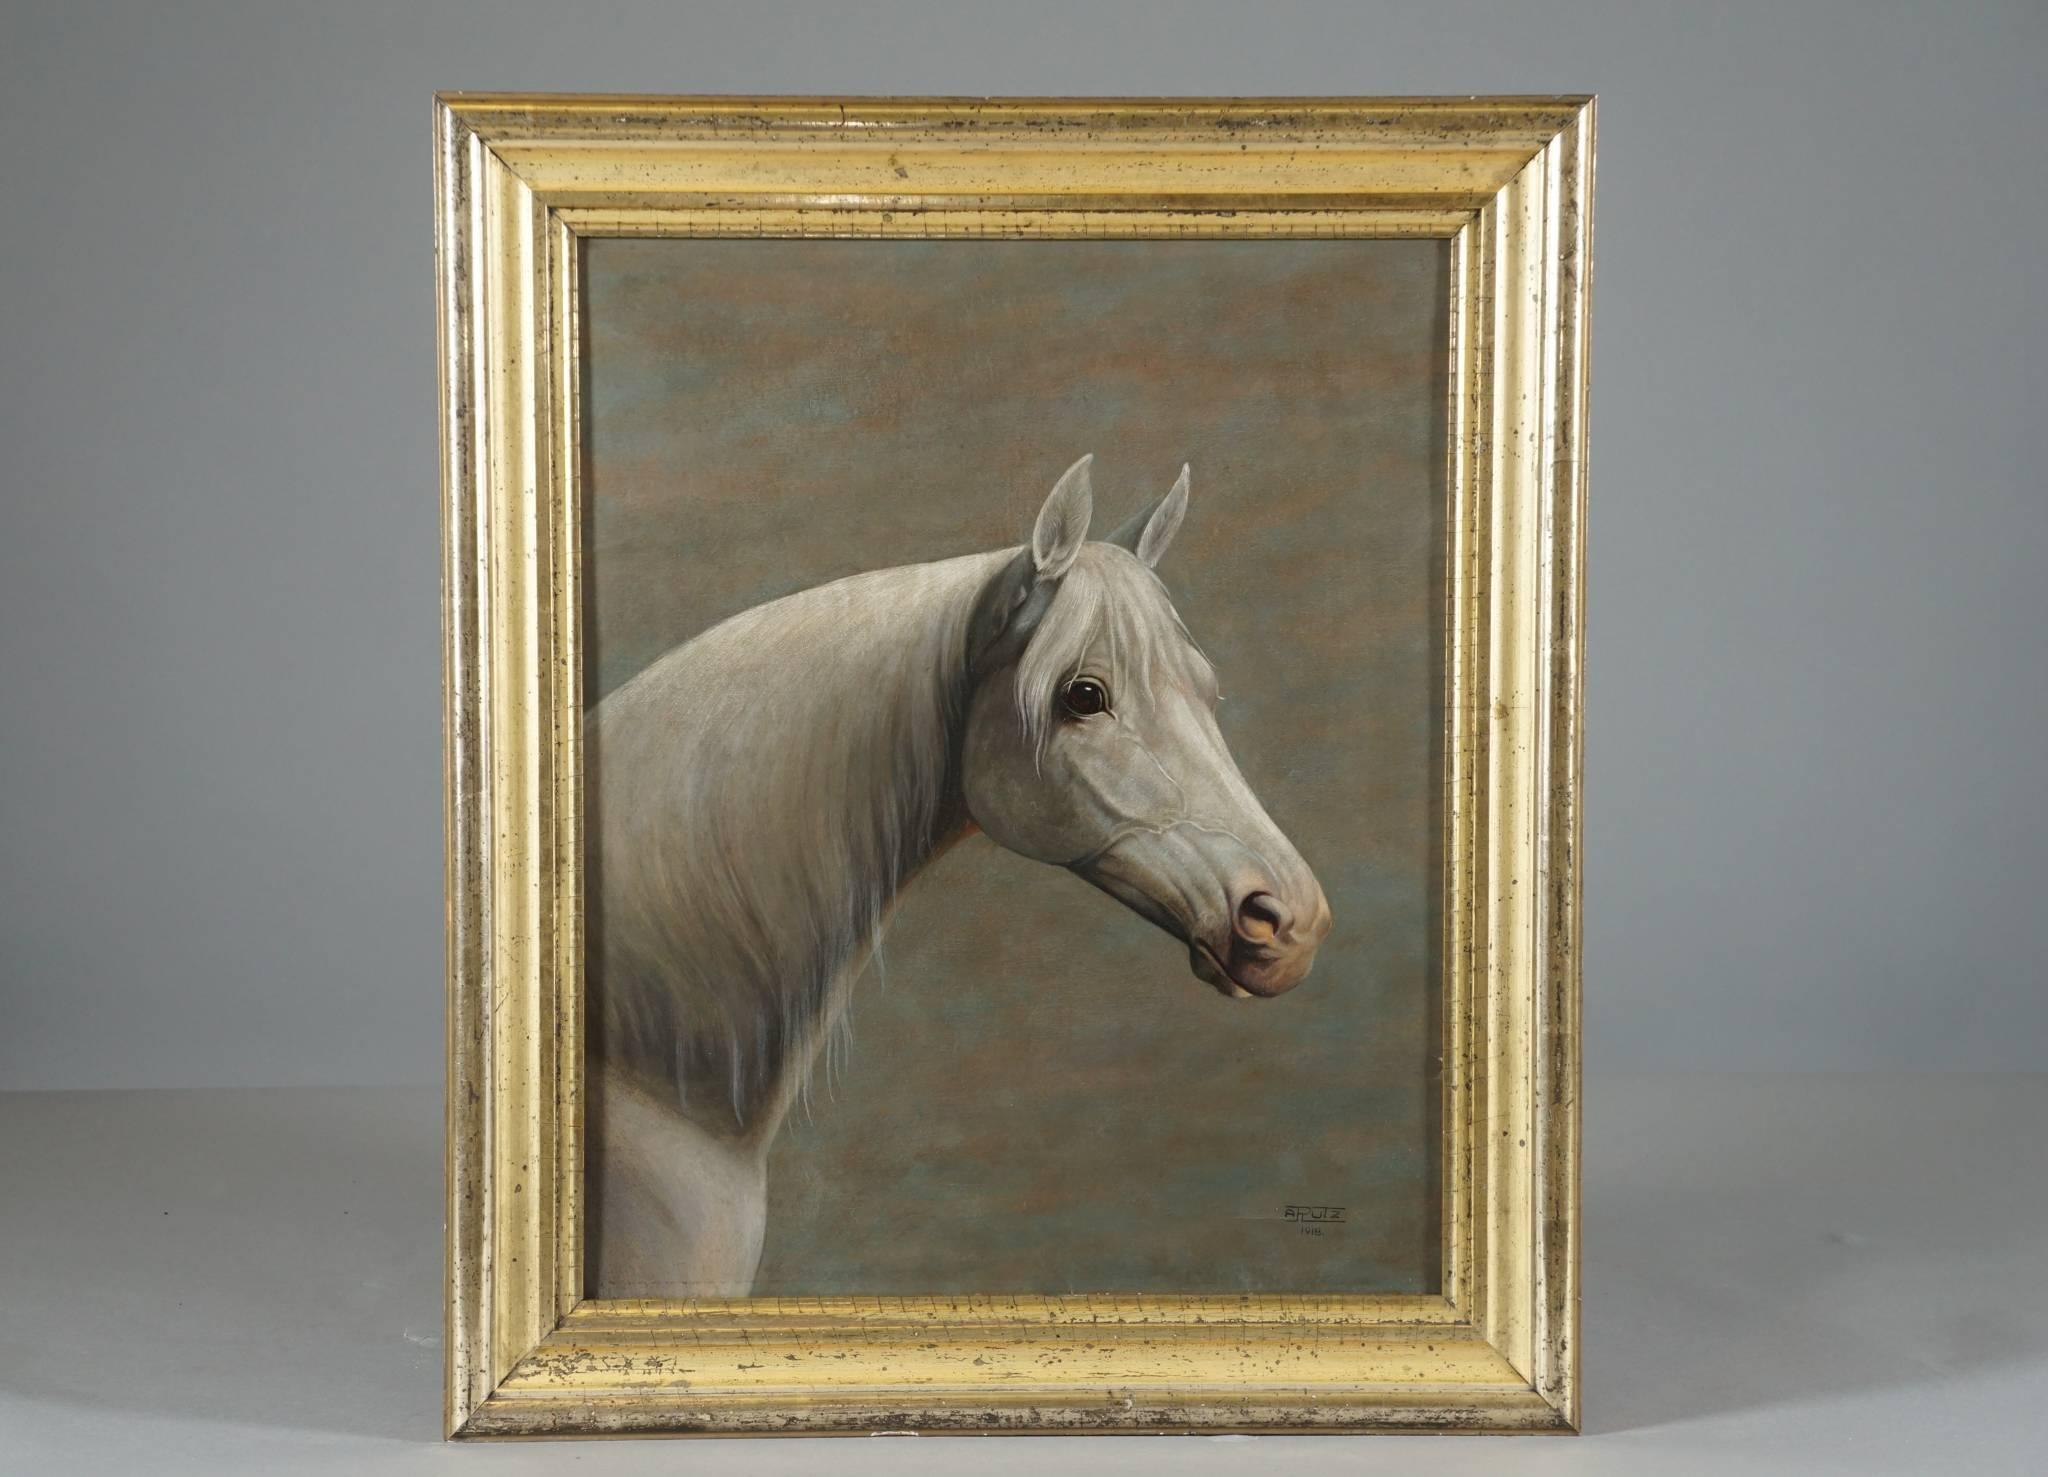 Andres Rutz, a Danish painter, who worked in Copenhagen in the first decade of the 20th century. This stunning/handsome portrait of a Racing horse
The painting is signed A Rutz and dated 1918
The canvas measures 16.5 W x 20 high
The gilt frame